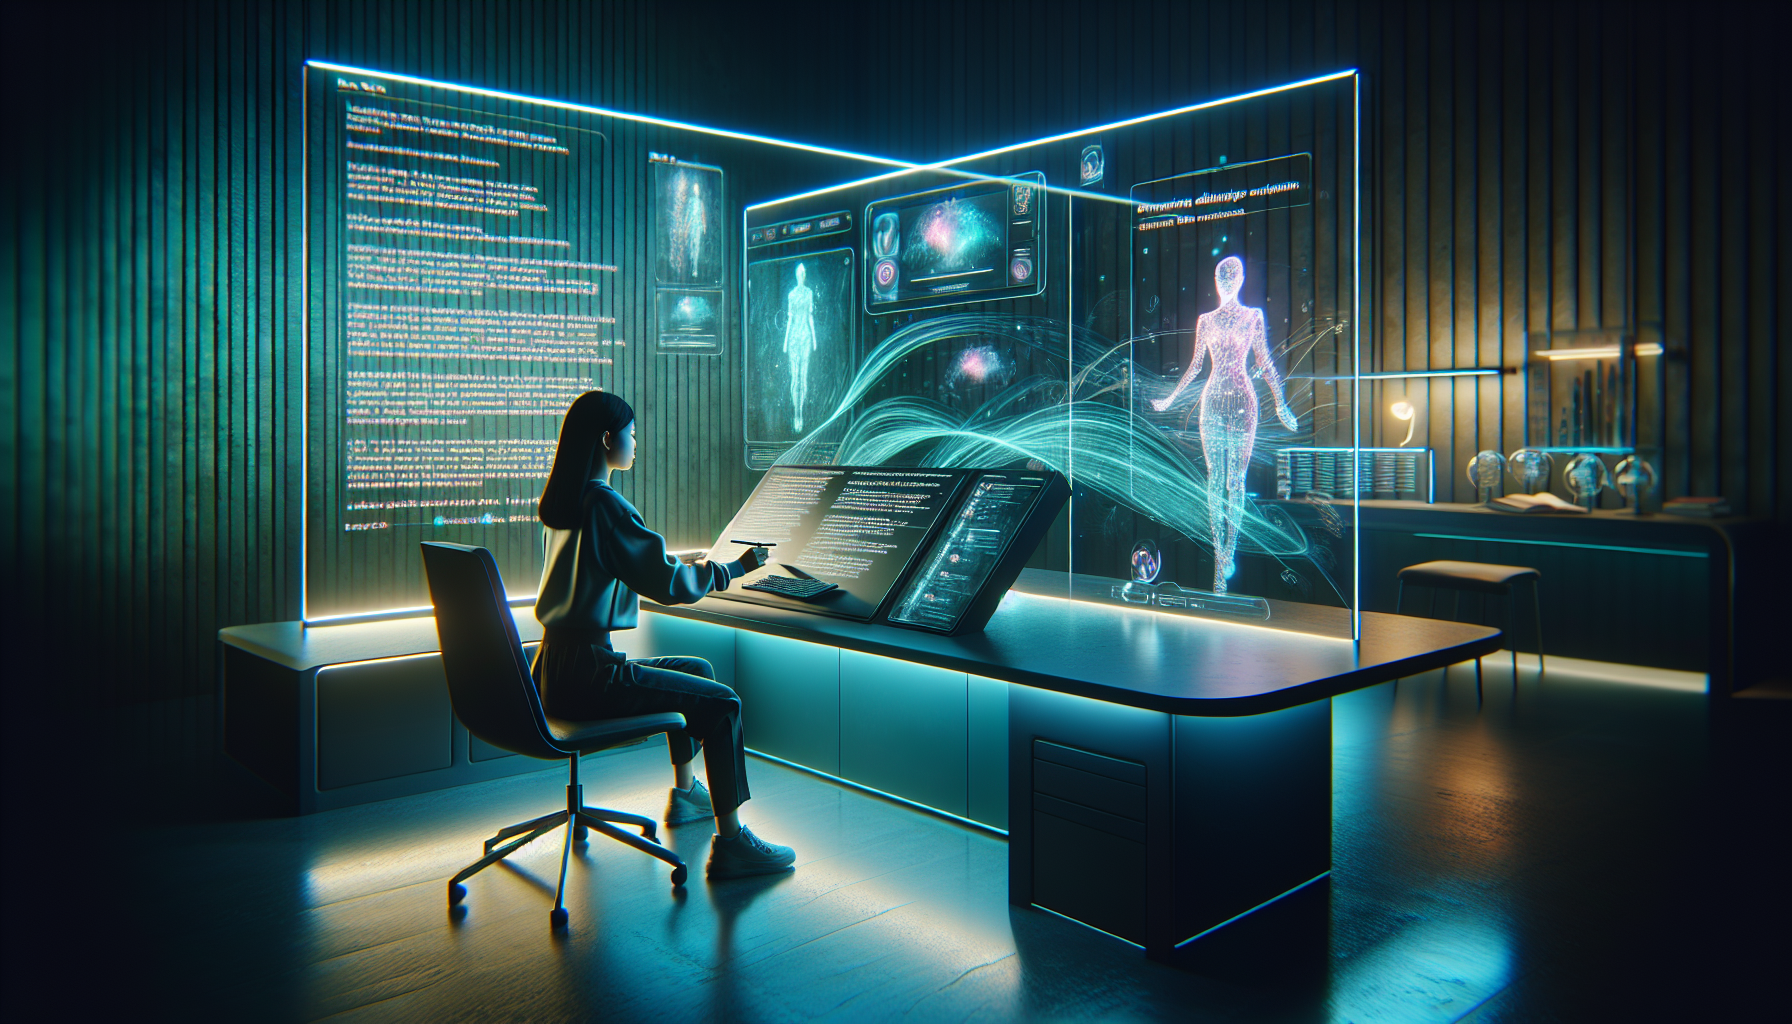 A futuristic, dimly lit writer's room where an author, a young Asian woman, is sitting at a sleek, modern desk surrounded by large transparent digital screens displaying flowing script. The screens vi